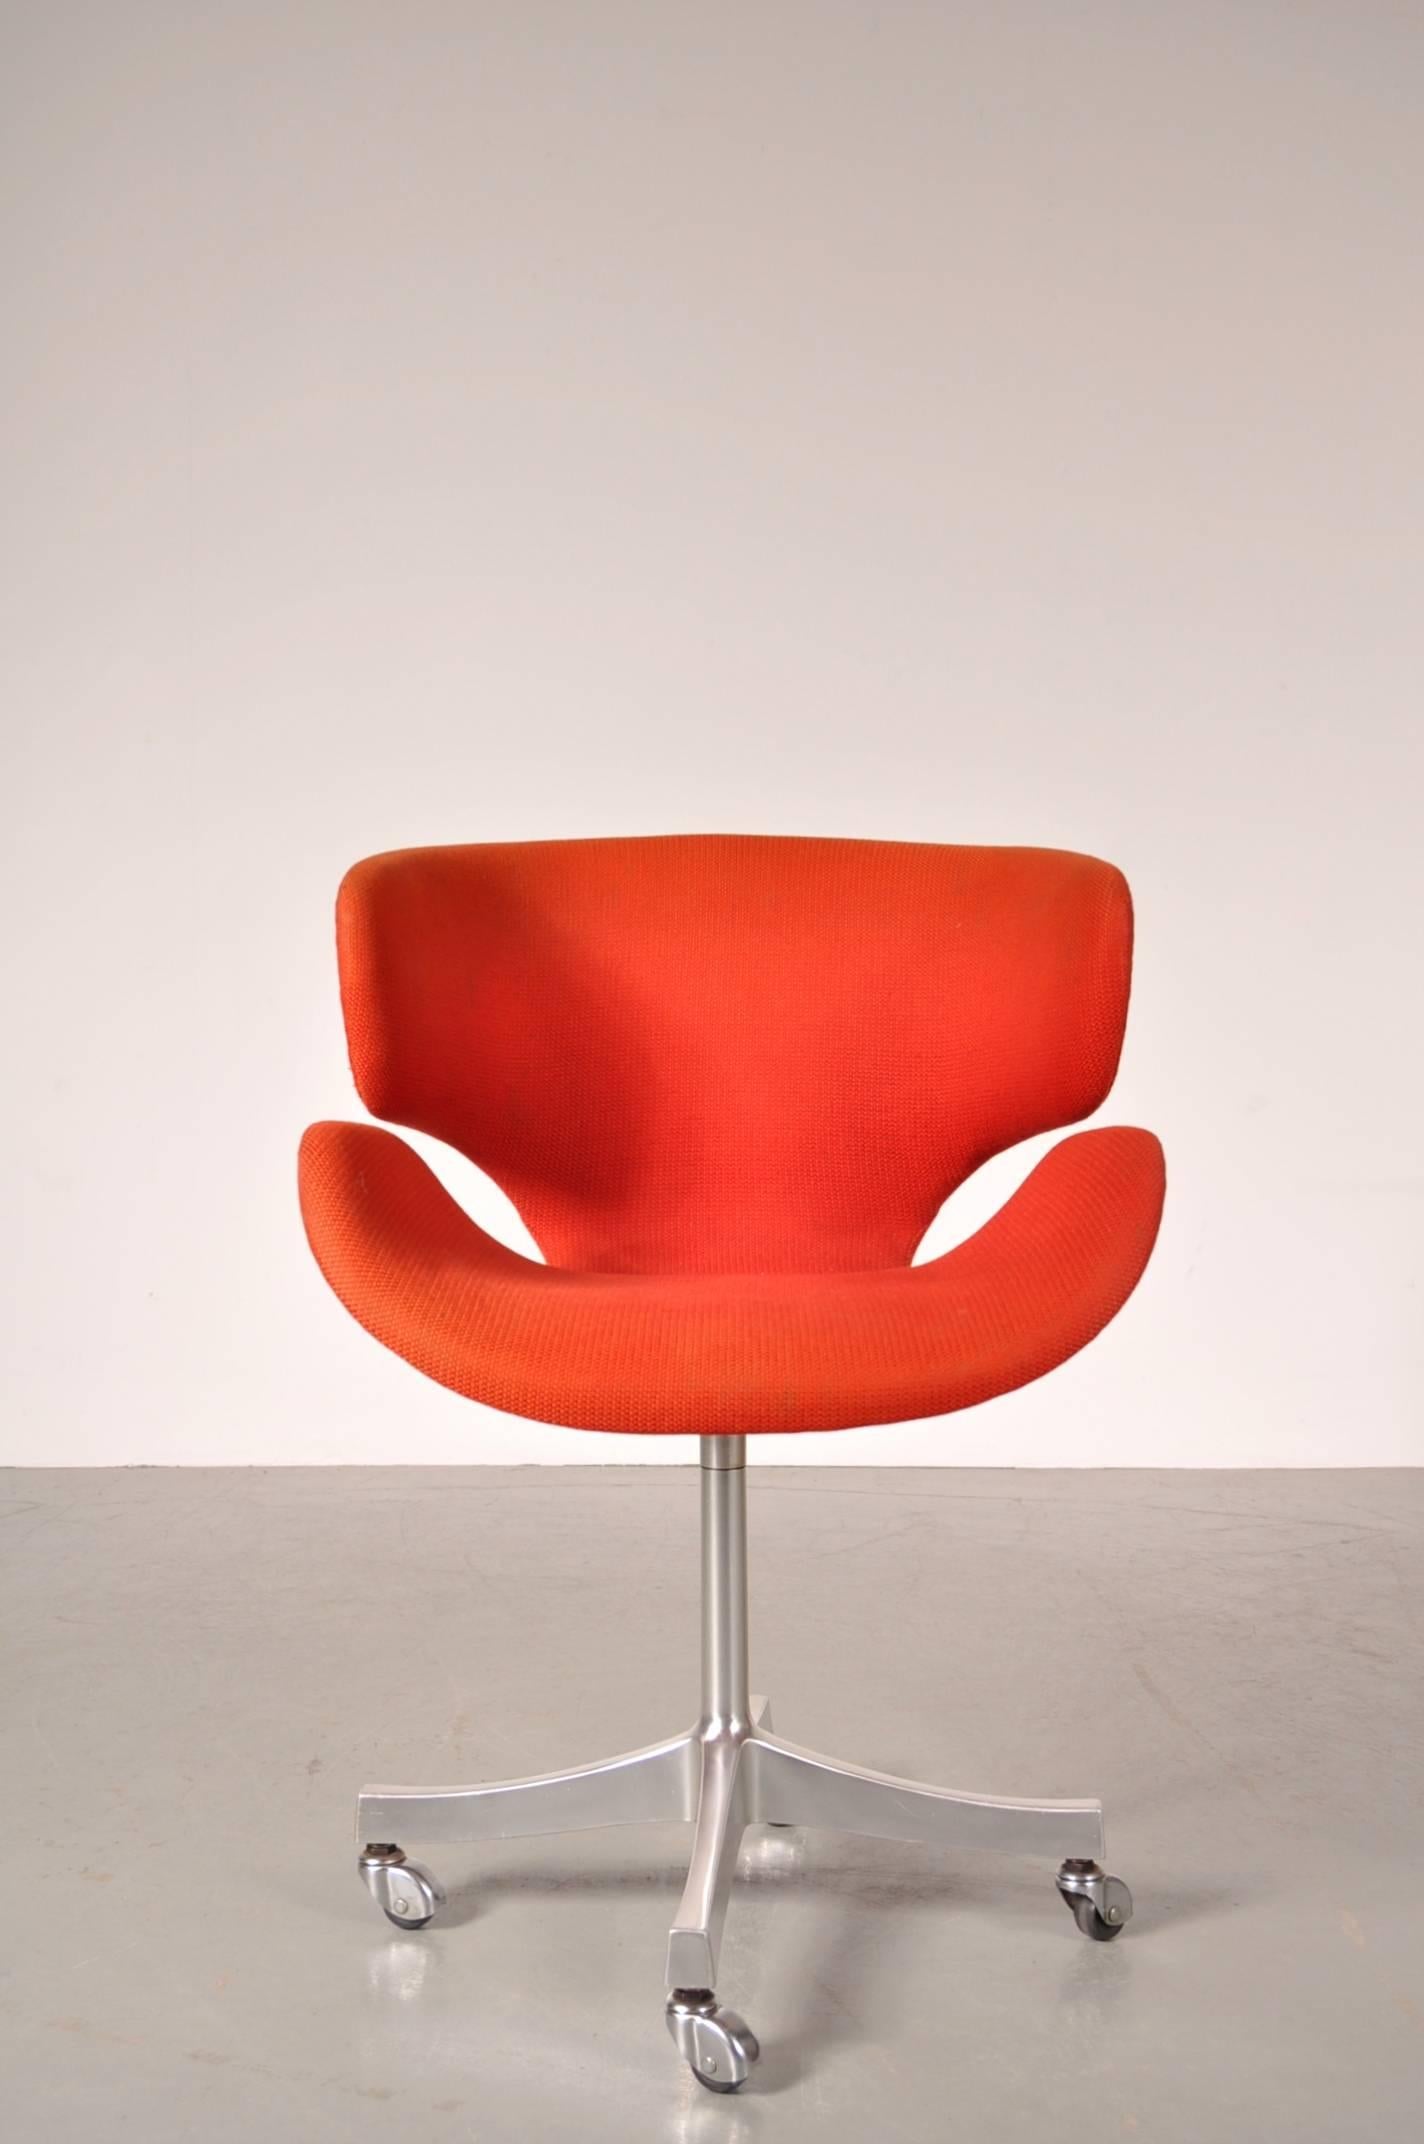 Japanese Kabuto Office Chair by Isamu Kenmochi for Tendo, Japan, 1961